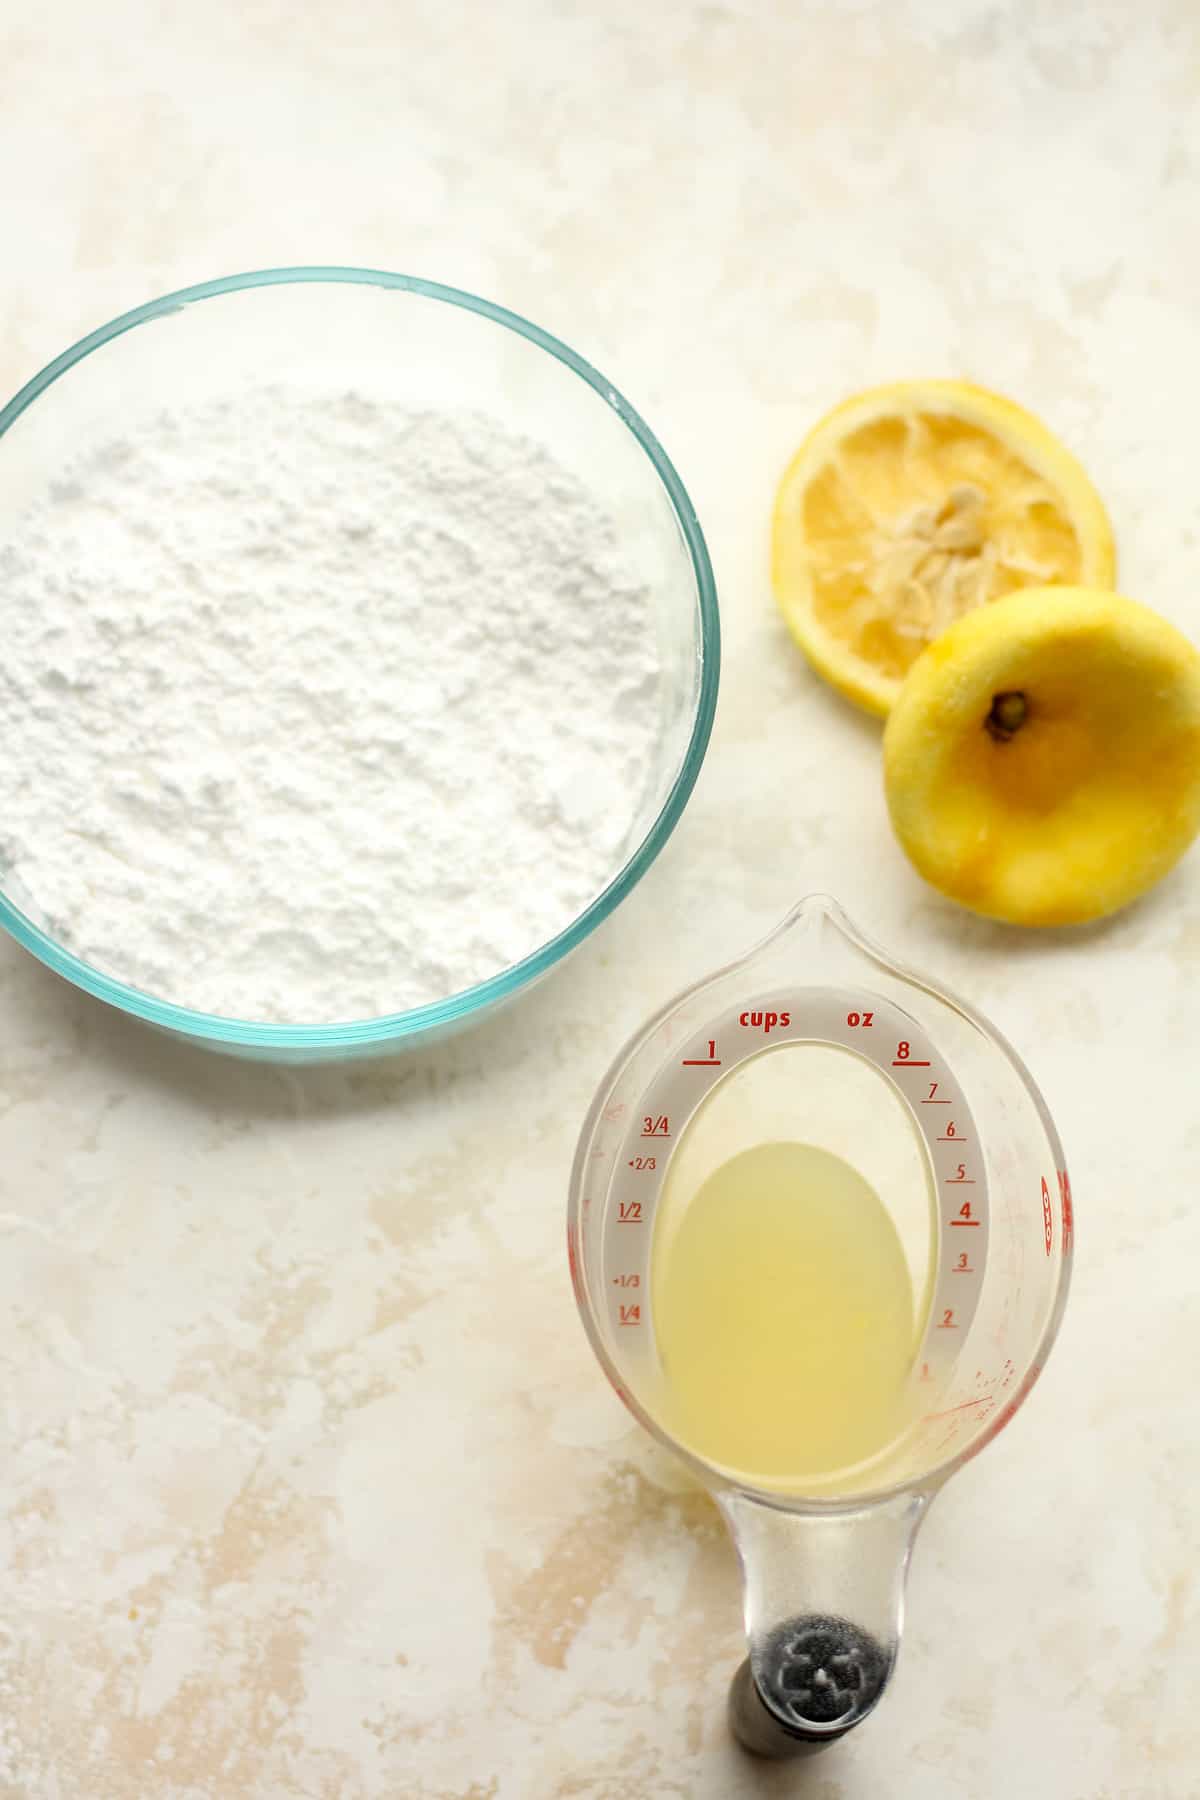 The powdered sugar with a squeezed lemon.